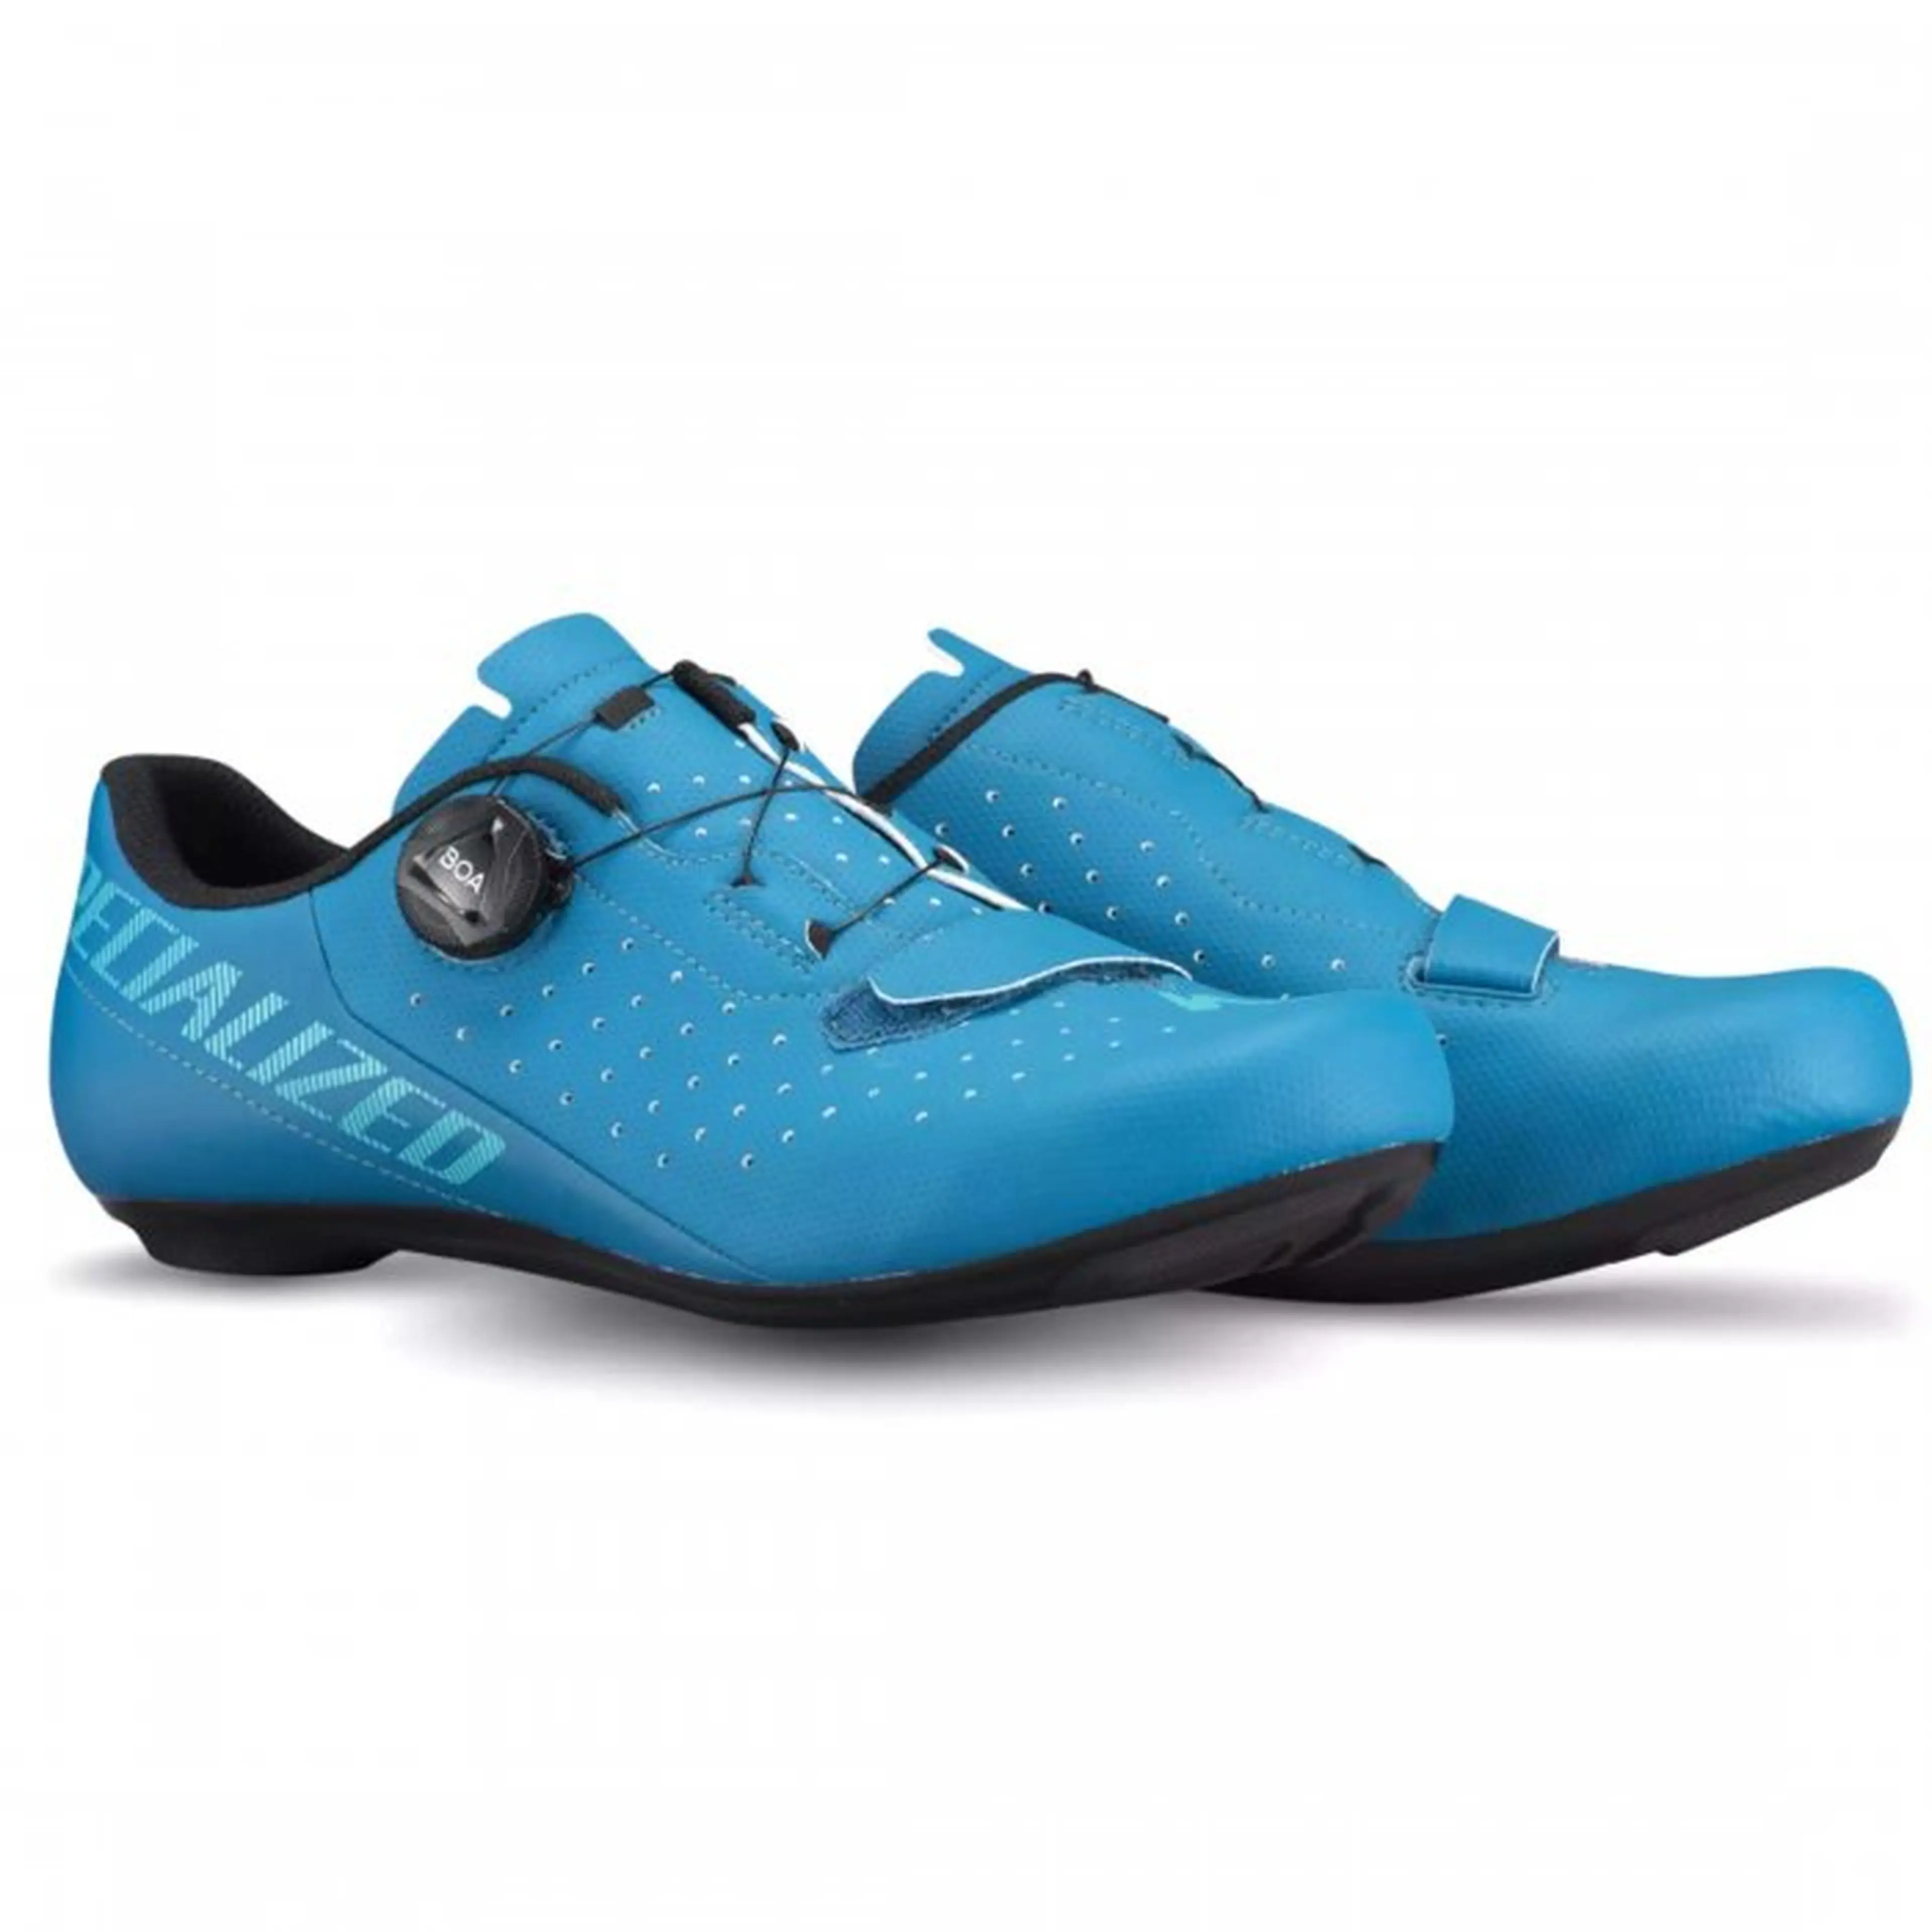 2. Pantofi SPECIALIZED Torch 1.0 Road - Tropical Teal/Lagoon Blue